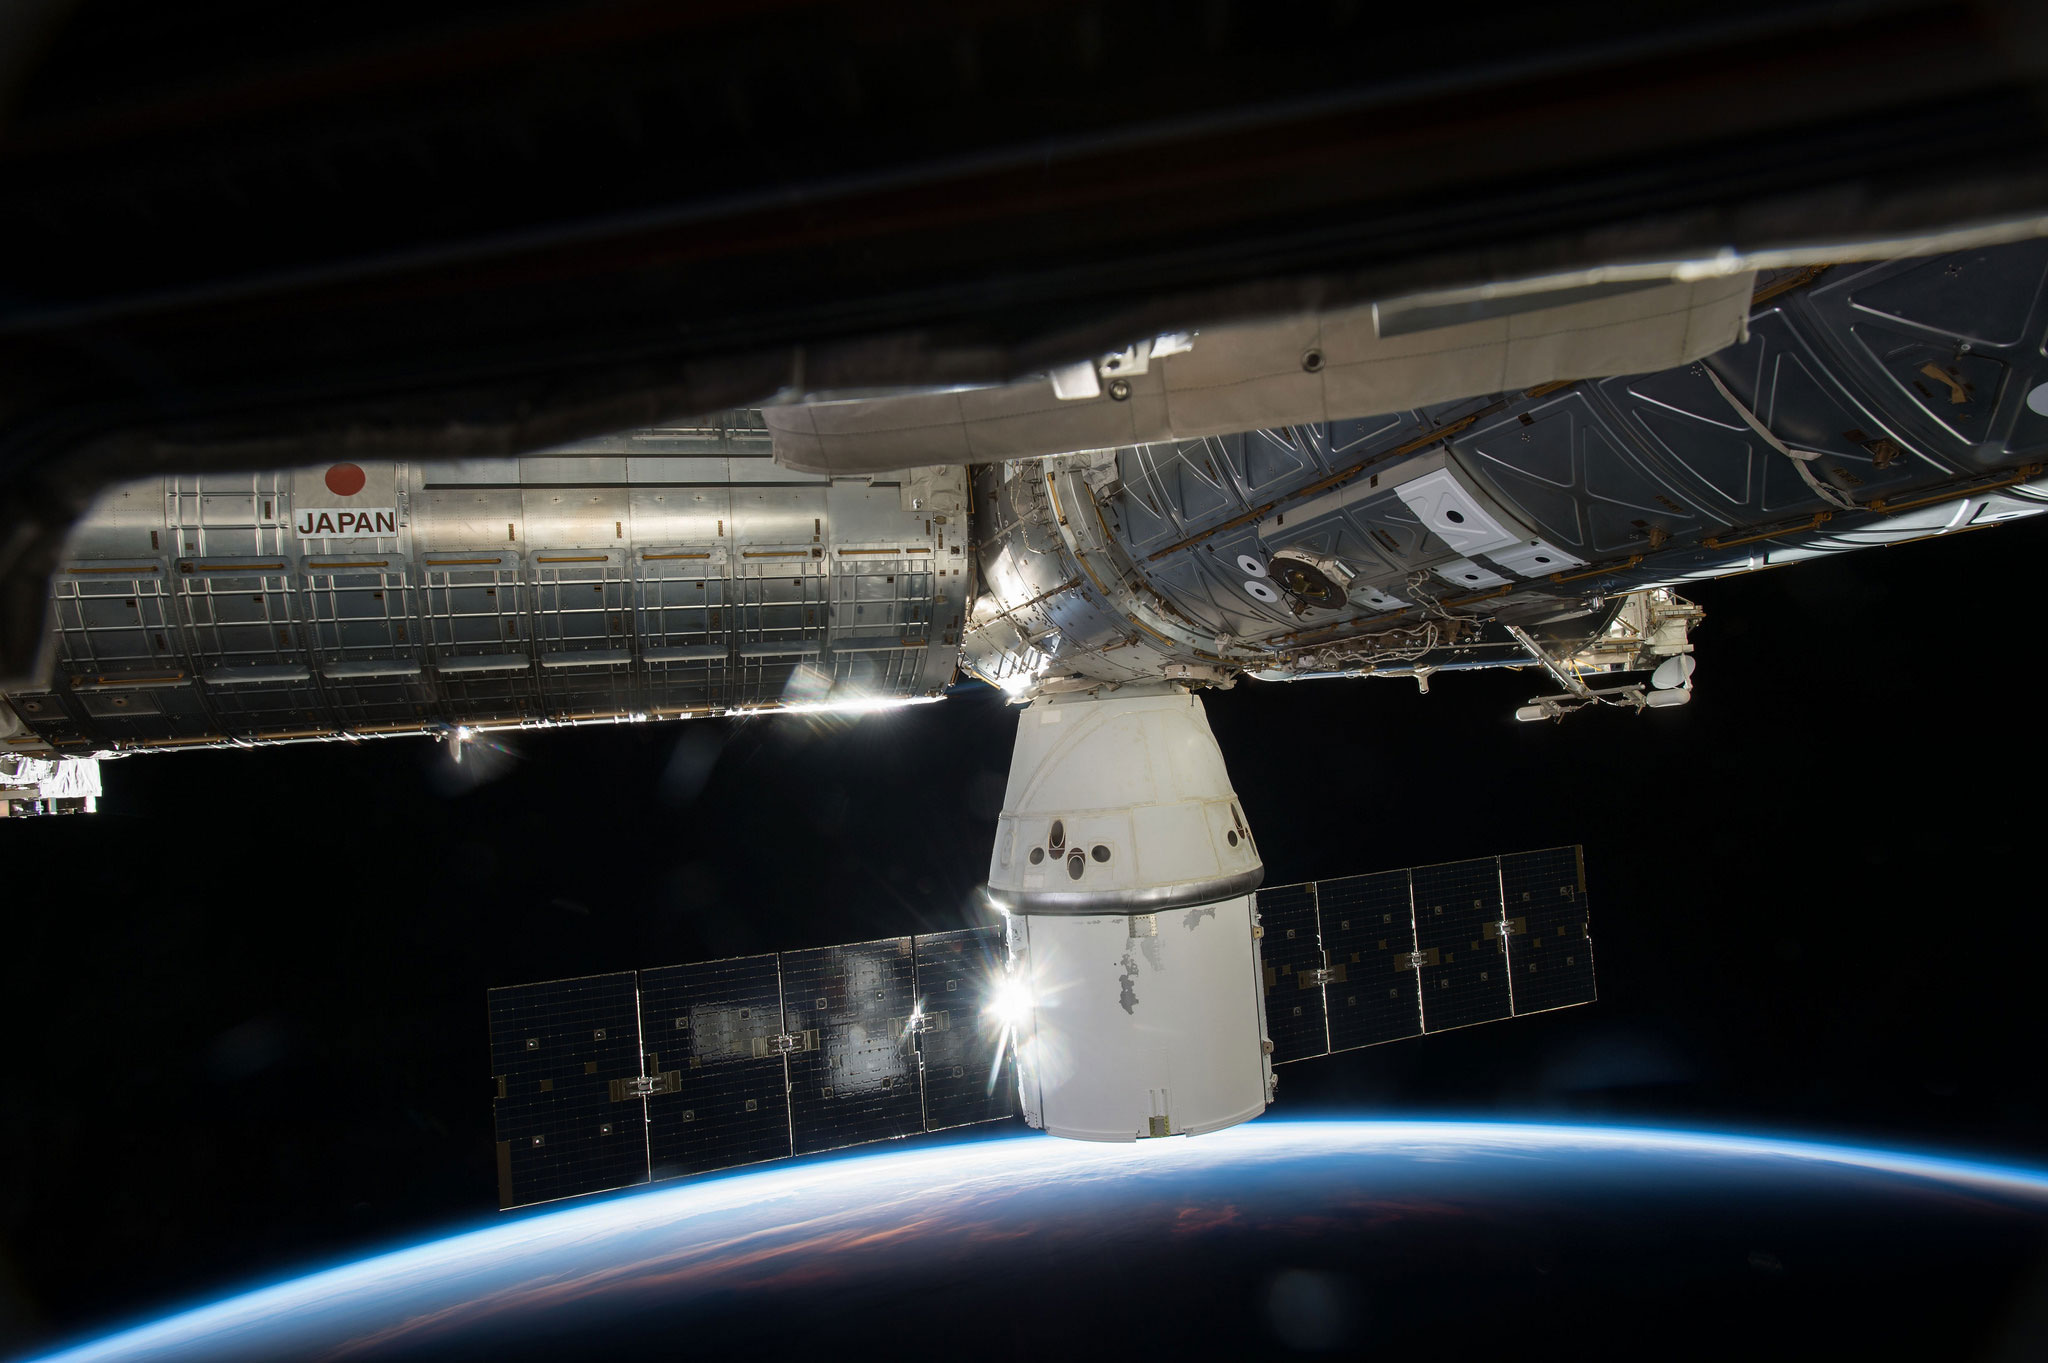 SpaceX's Dragon cargo capsule is seen here docked to the Earth-facing port of the Harmony module of the International Space Station. SpaceX's sixth commercial resupply flight arrived at the station on April 17.